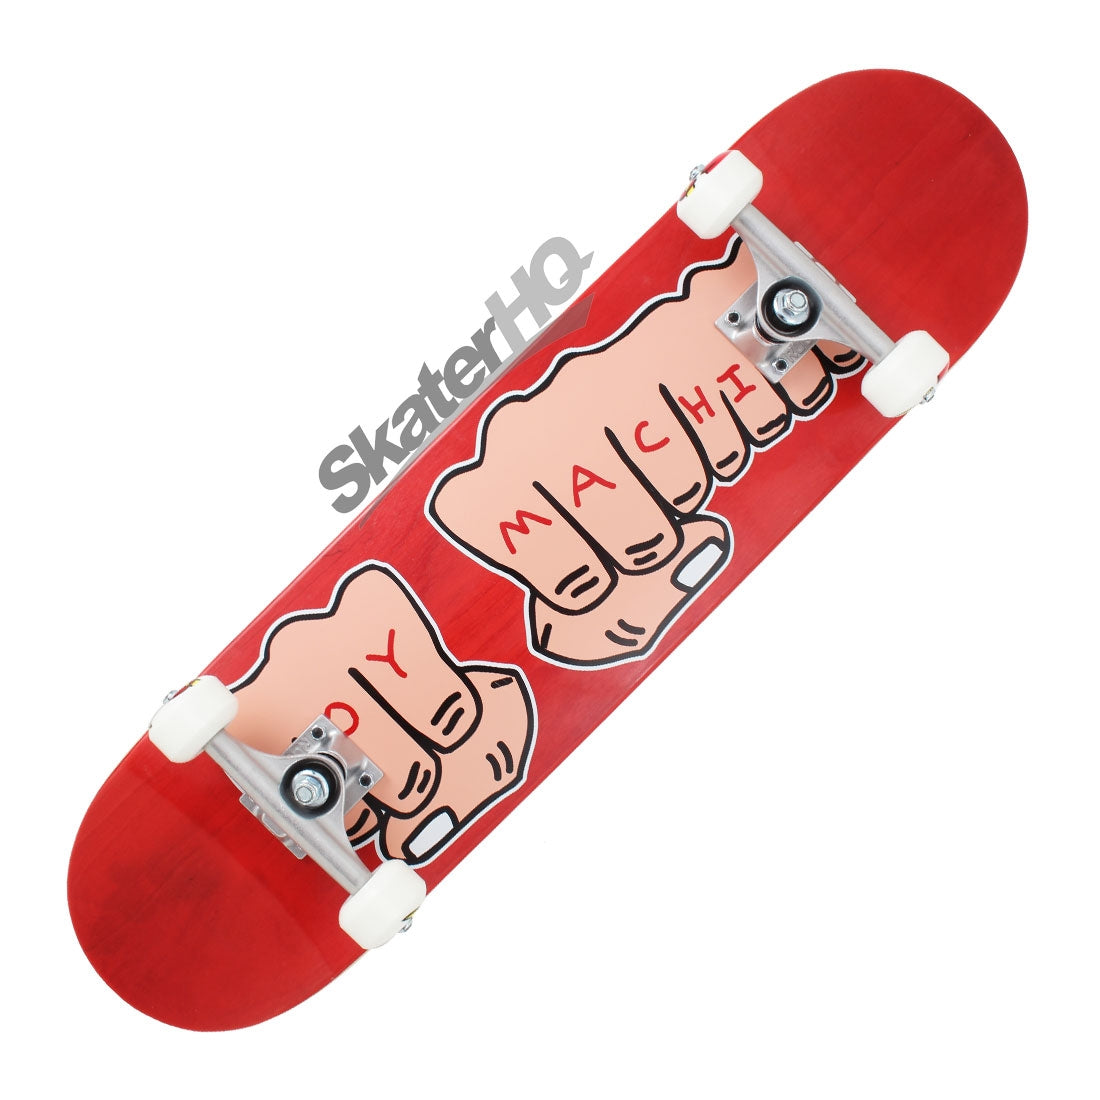 Toy Machine Fists 7.75 Complete - Red Skateboard Completes Modern Street